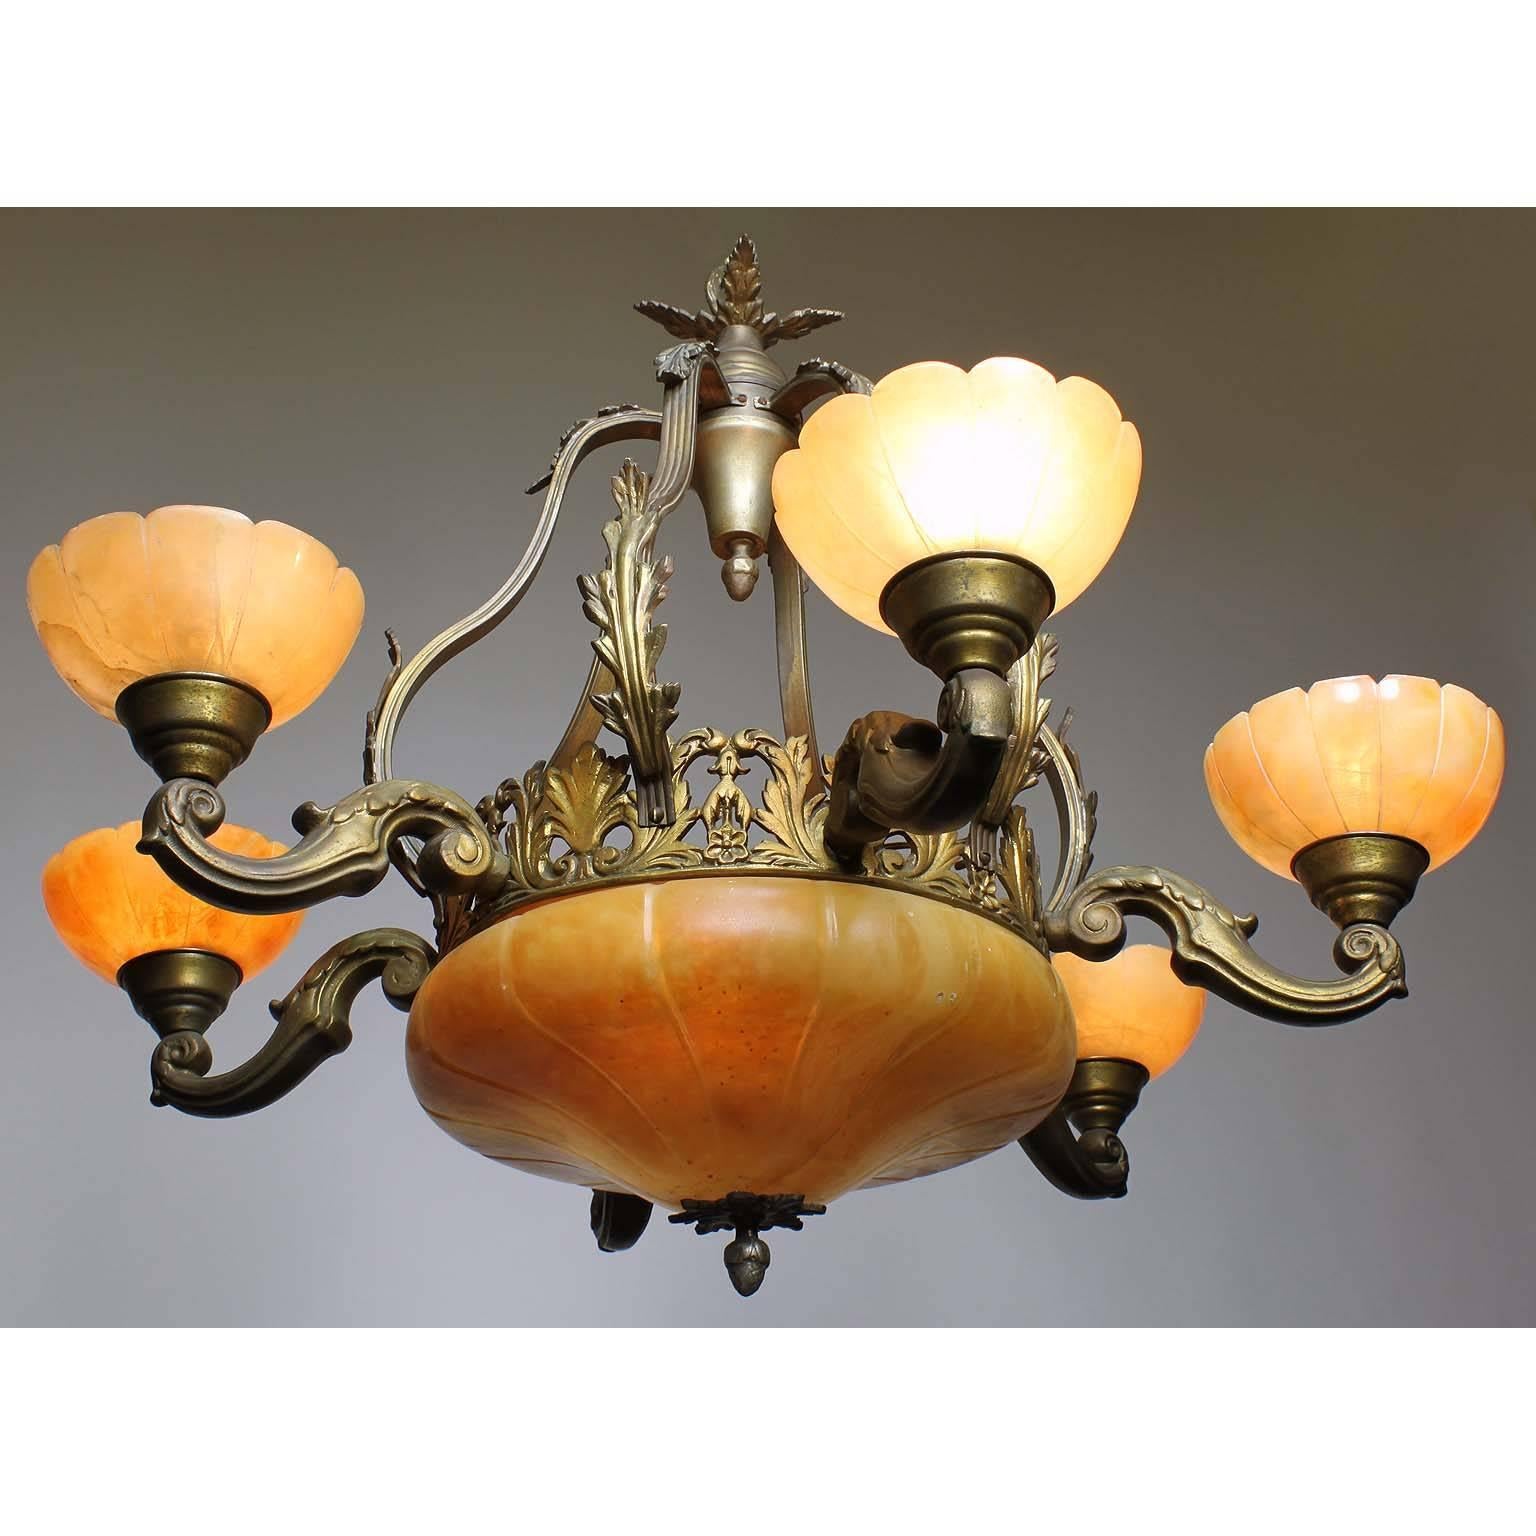 A French 20th century Art Deco bronze and carved veined caramel-colored alabaster six-light chandelier. The carved circular alabaster plafonnier, with an interior light, on a floral apron and banded bronze frame surmounted with six 